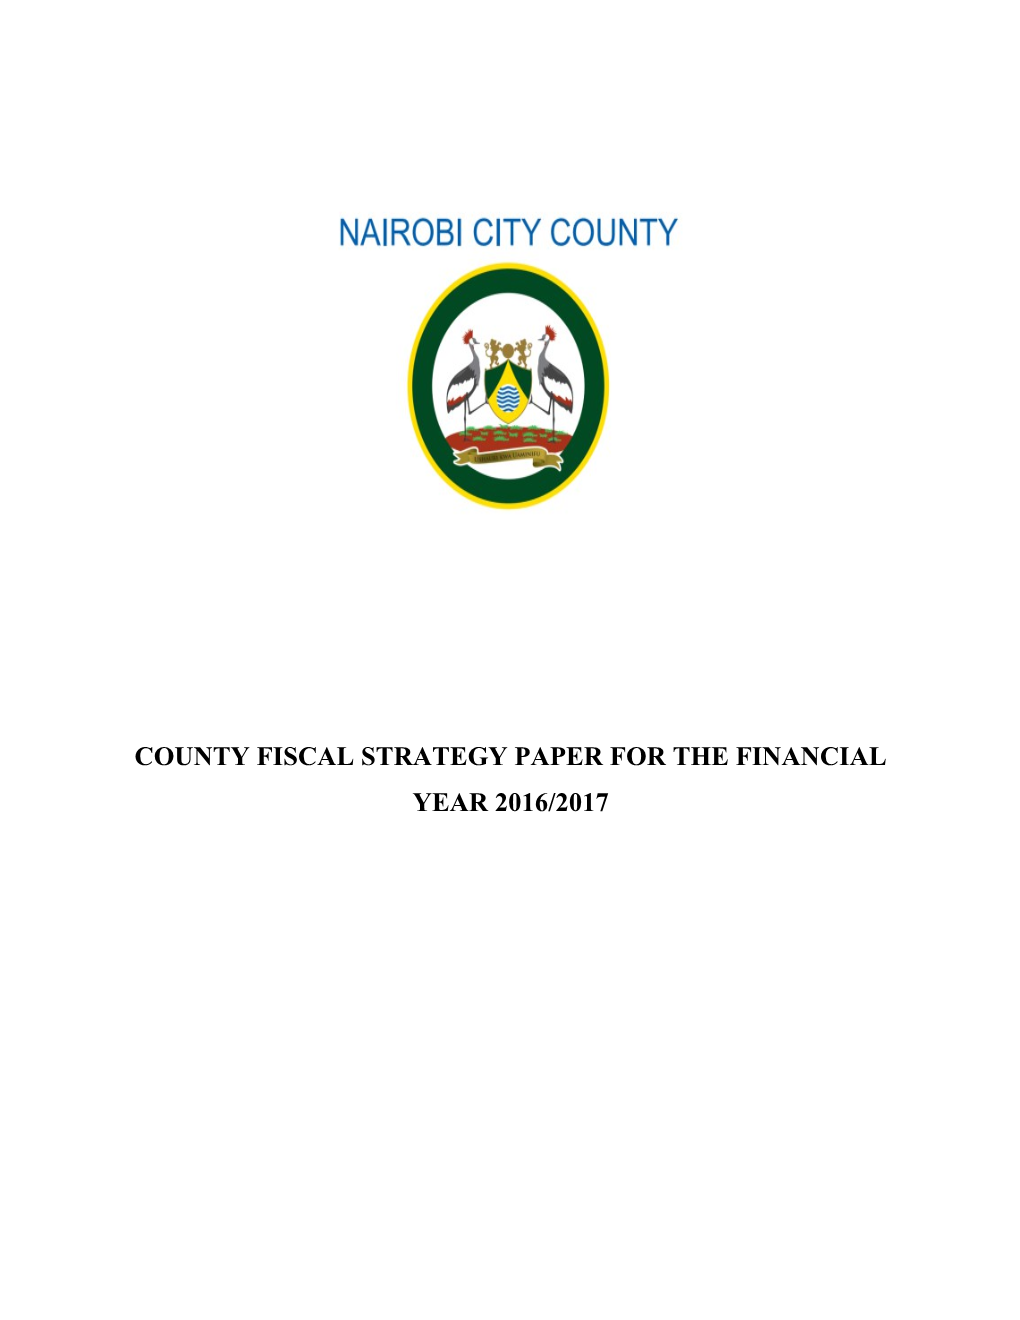 County Fiscal Strategy Paper for the Financial Year 2016/2017